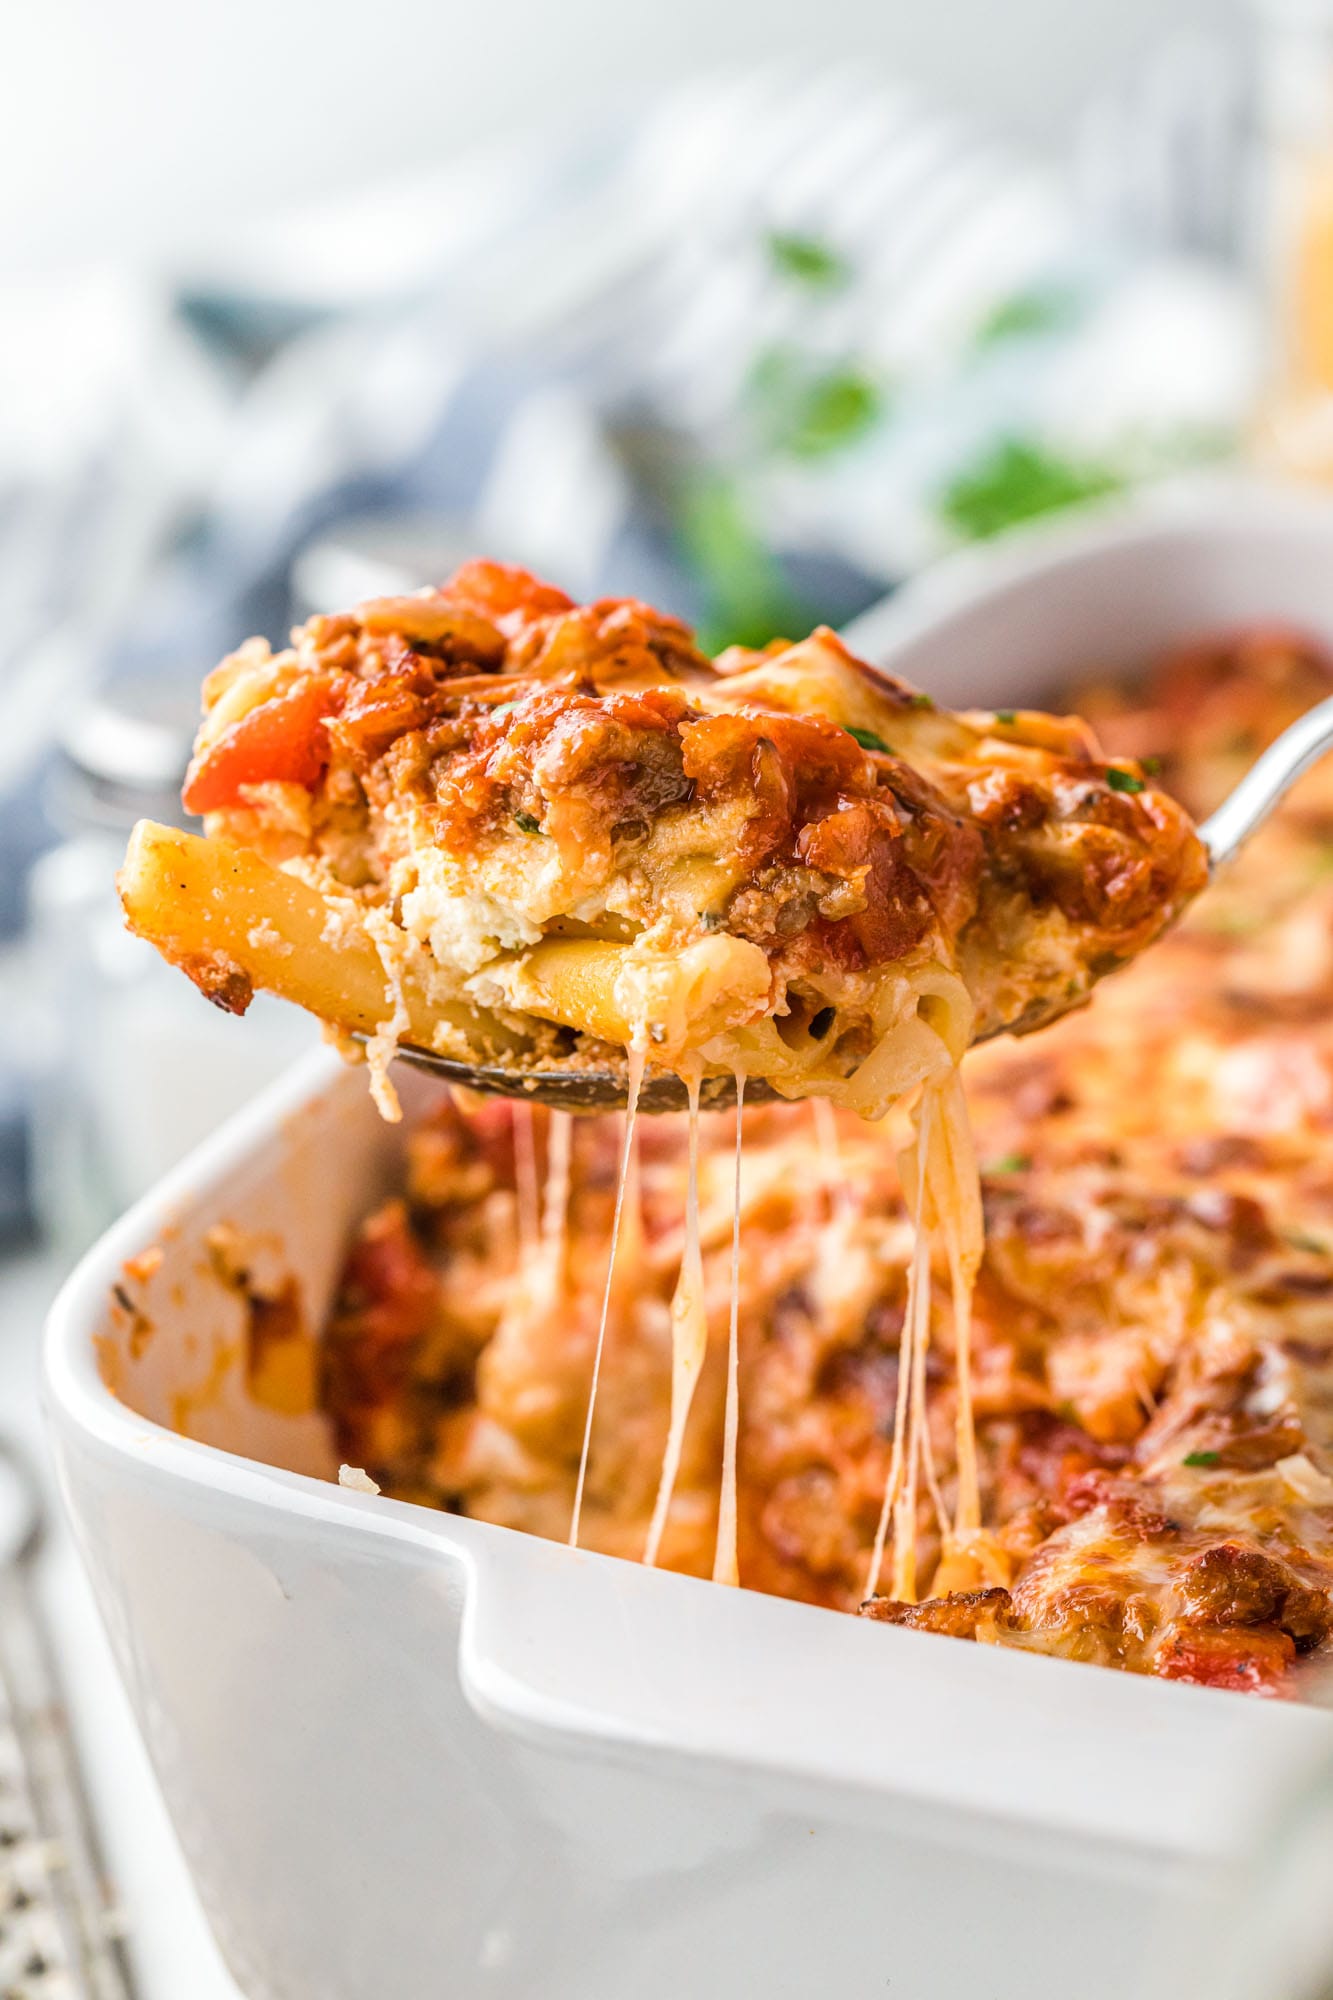 a spoon lifting up baked ziti from the pan, showing the melty cheese.